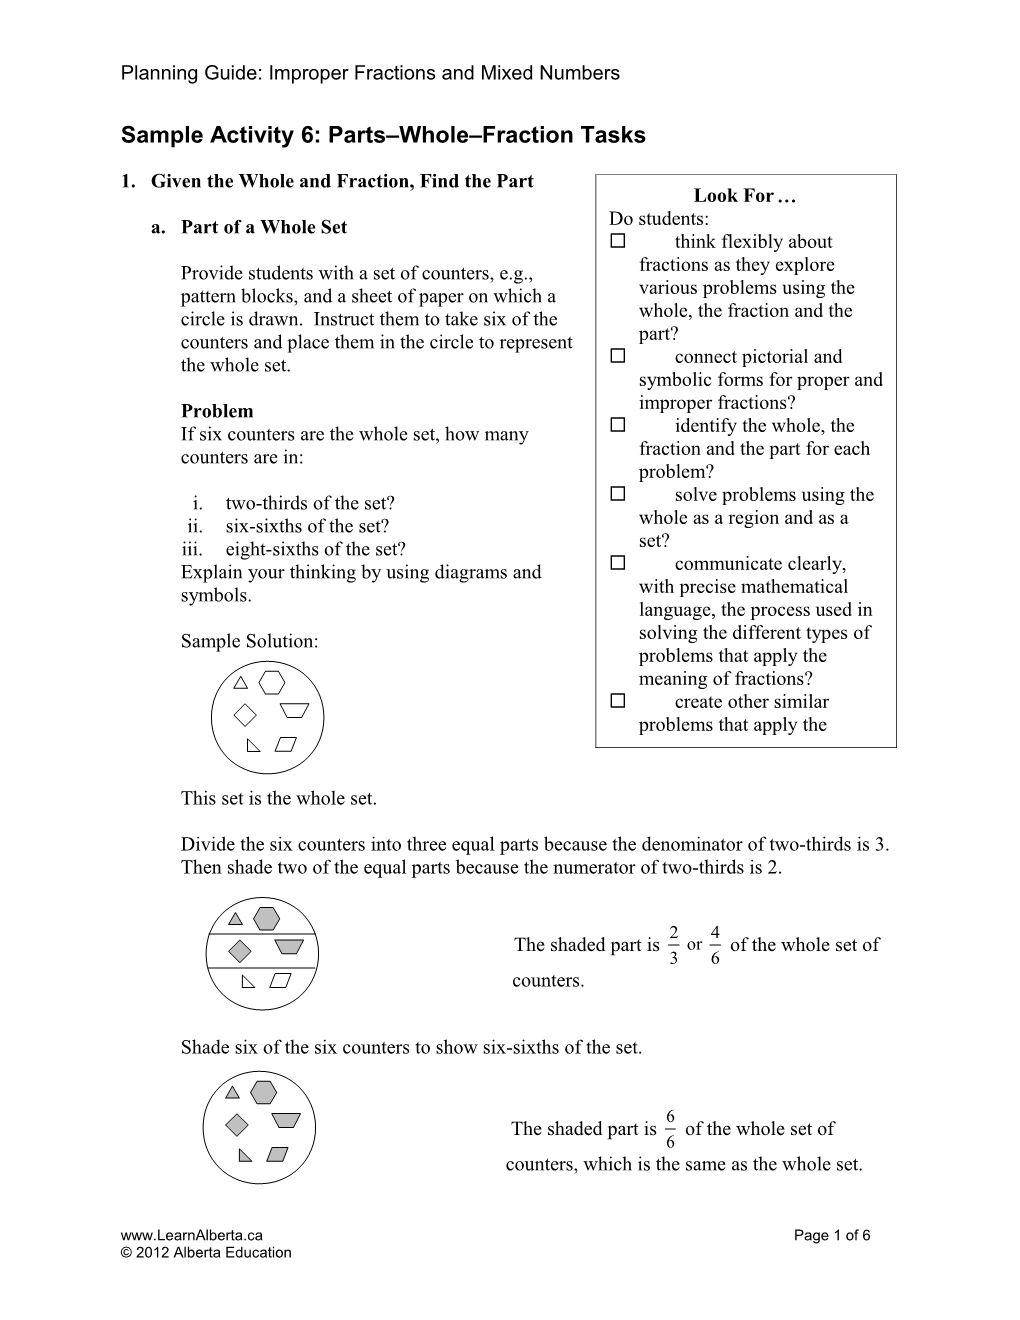 Sample Activity 4: Problem Solving with Patterns s1